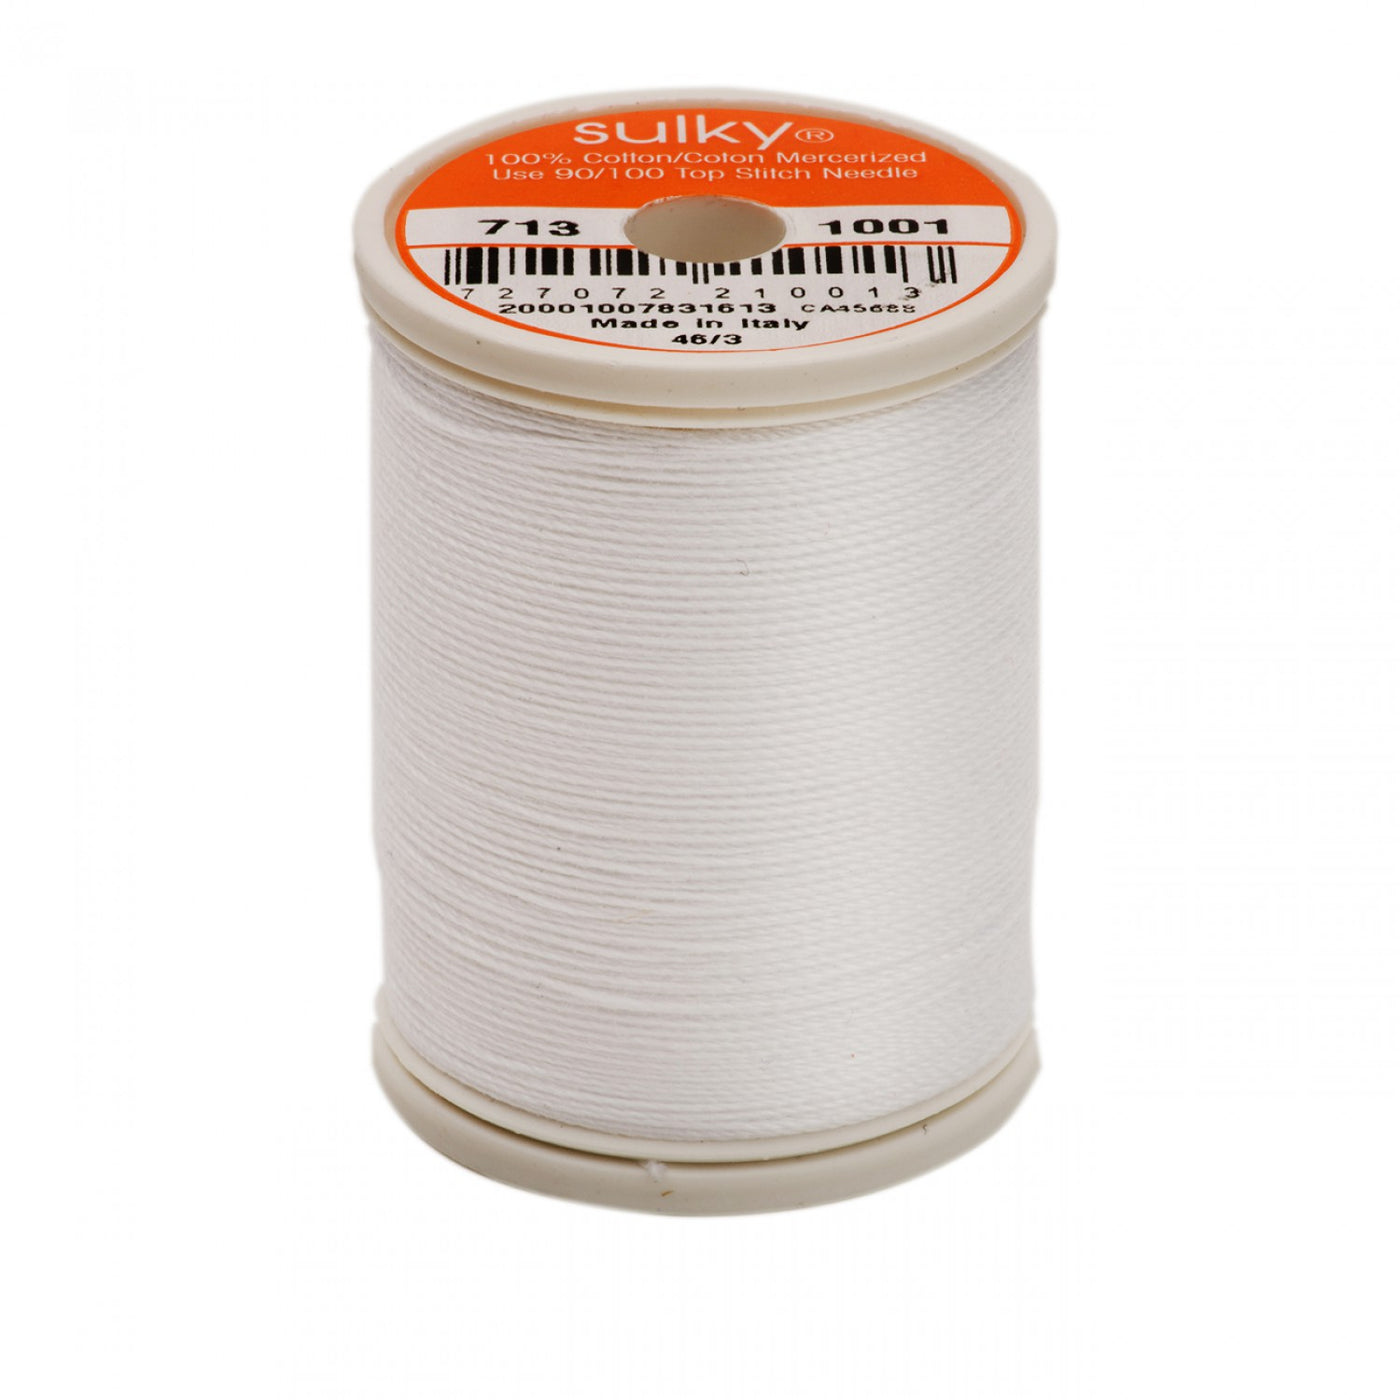 Cotton + Steel by Sulky Thread 8 piece collection with needles